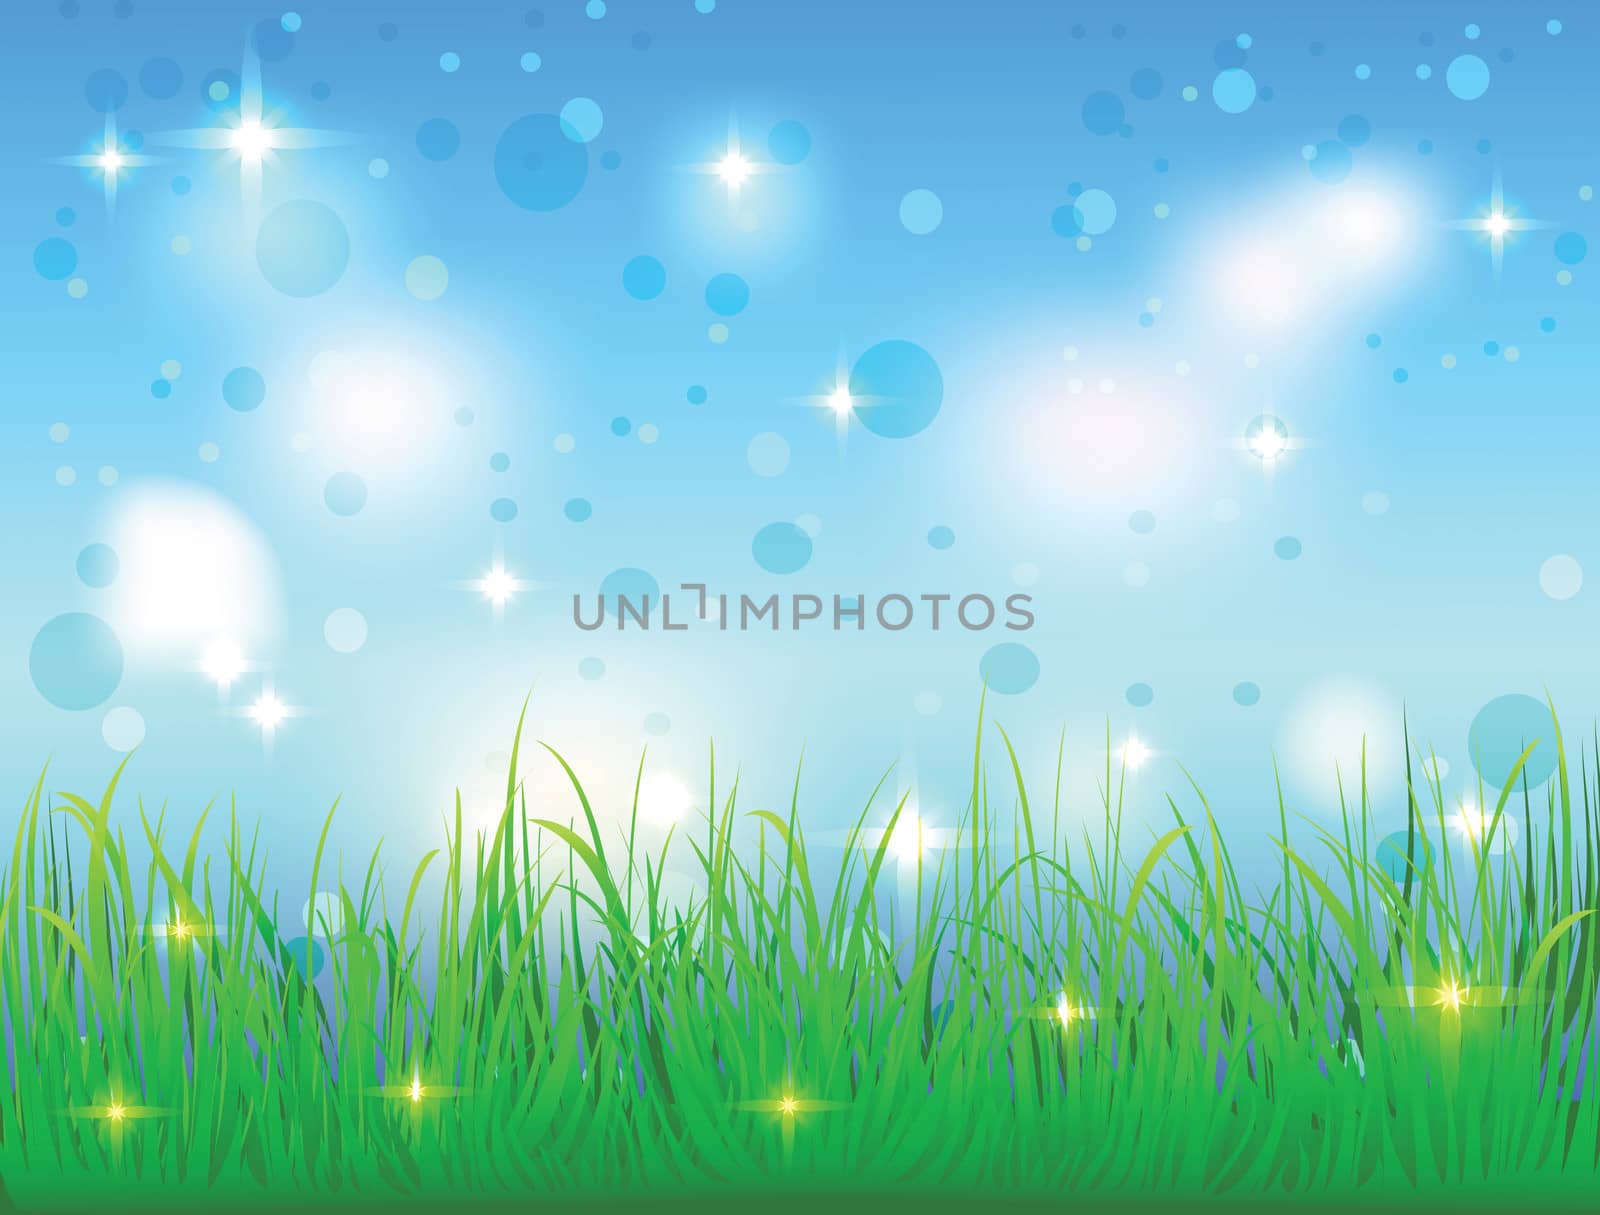 beautiful bright abstract background of summer sky with green grass